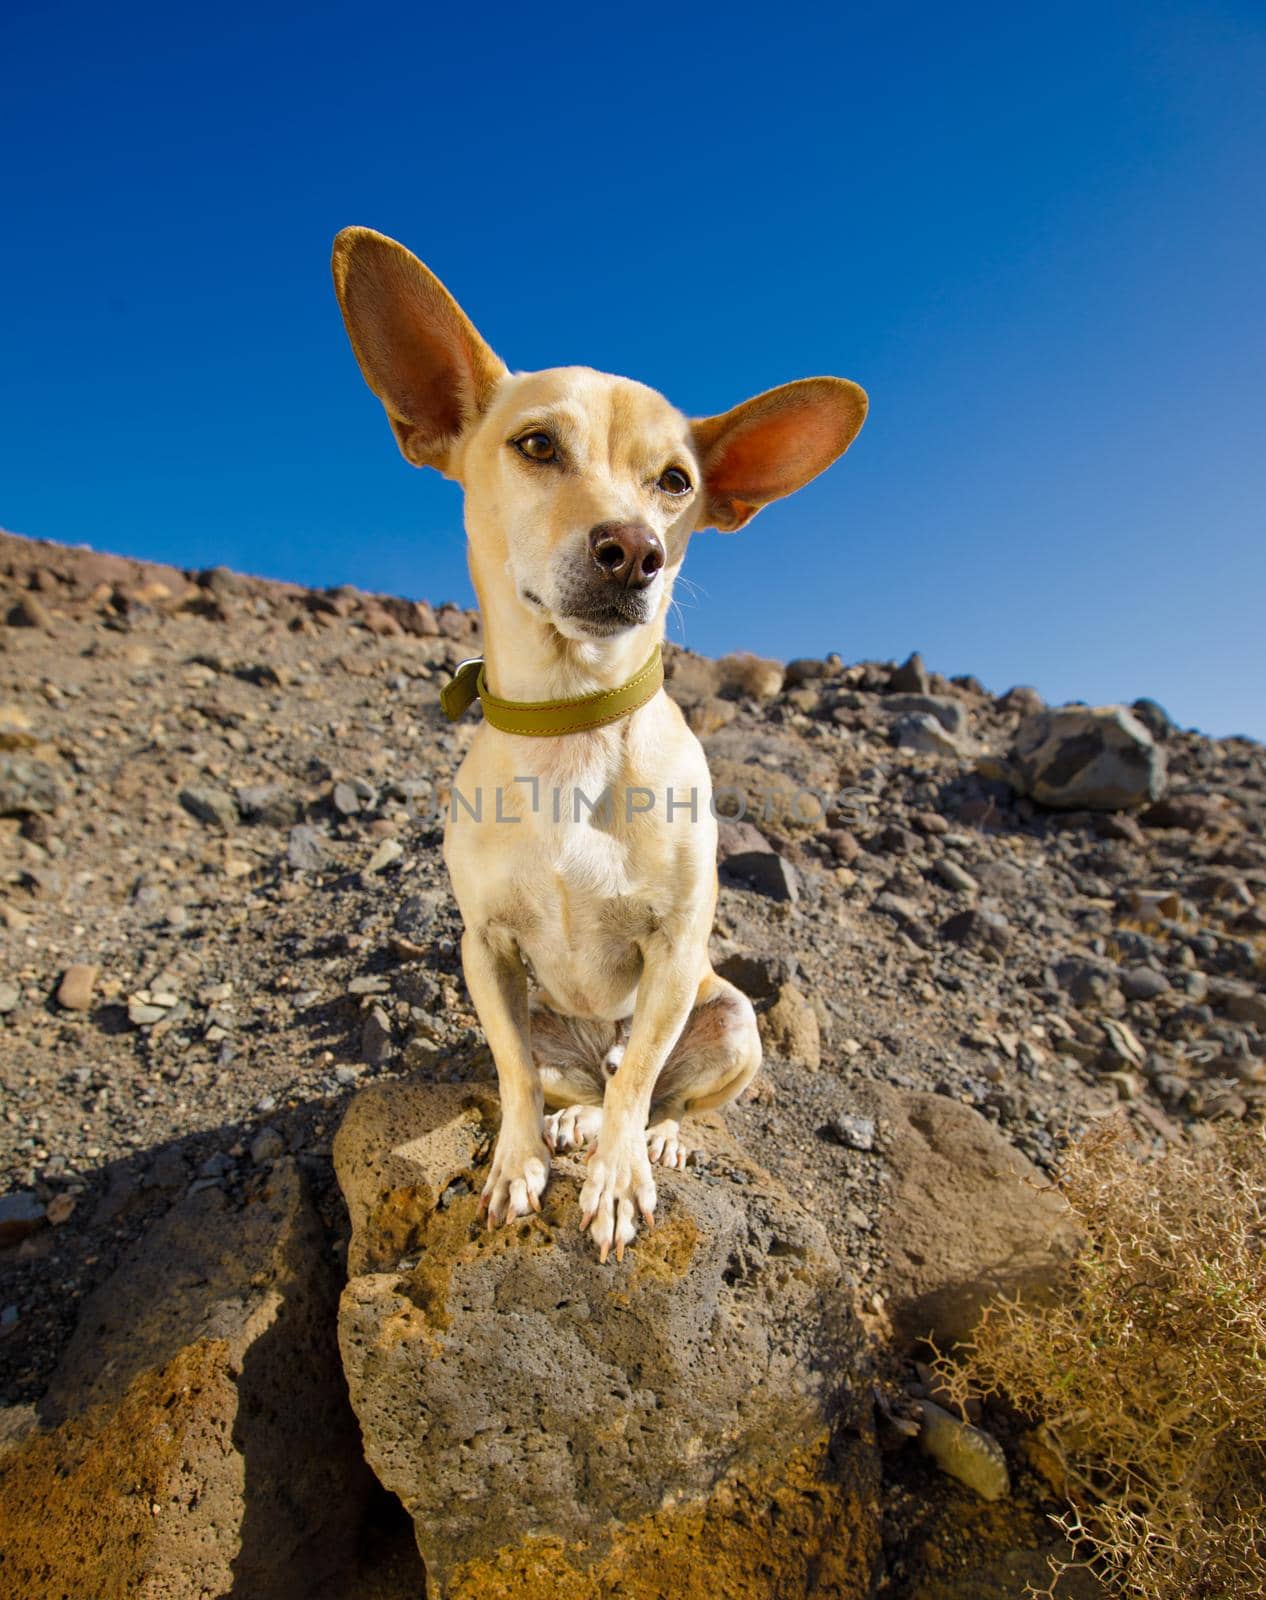 chihuahua dog watching and looking at owner ready to go for a walk outdoors and outside on the desert mountain